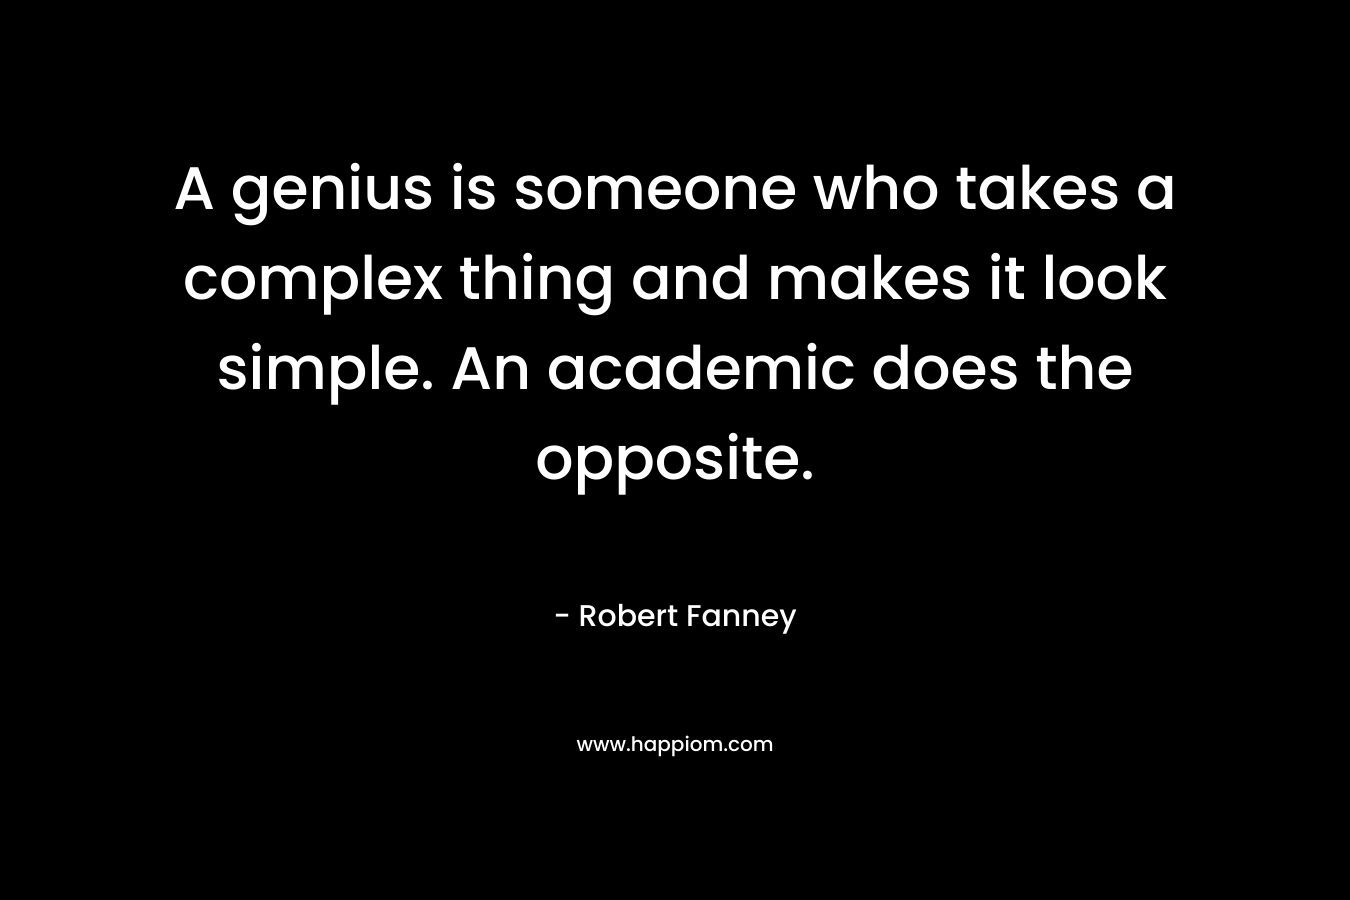 A genius is someone who takes a complex thing and makes it look simple. An academic does the opposite. – Robert Fanney